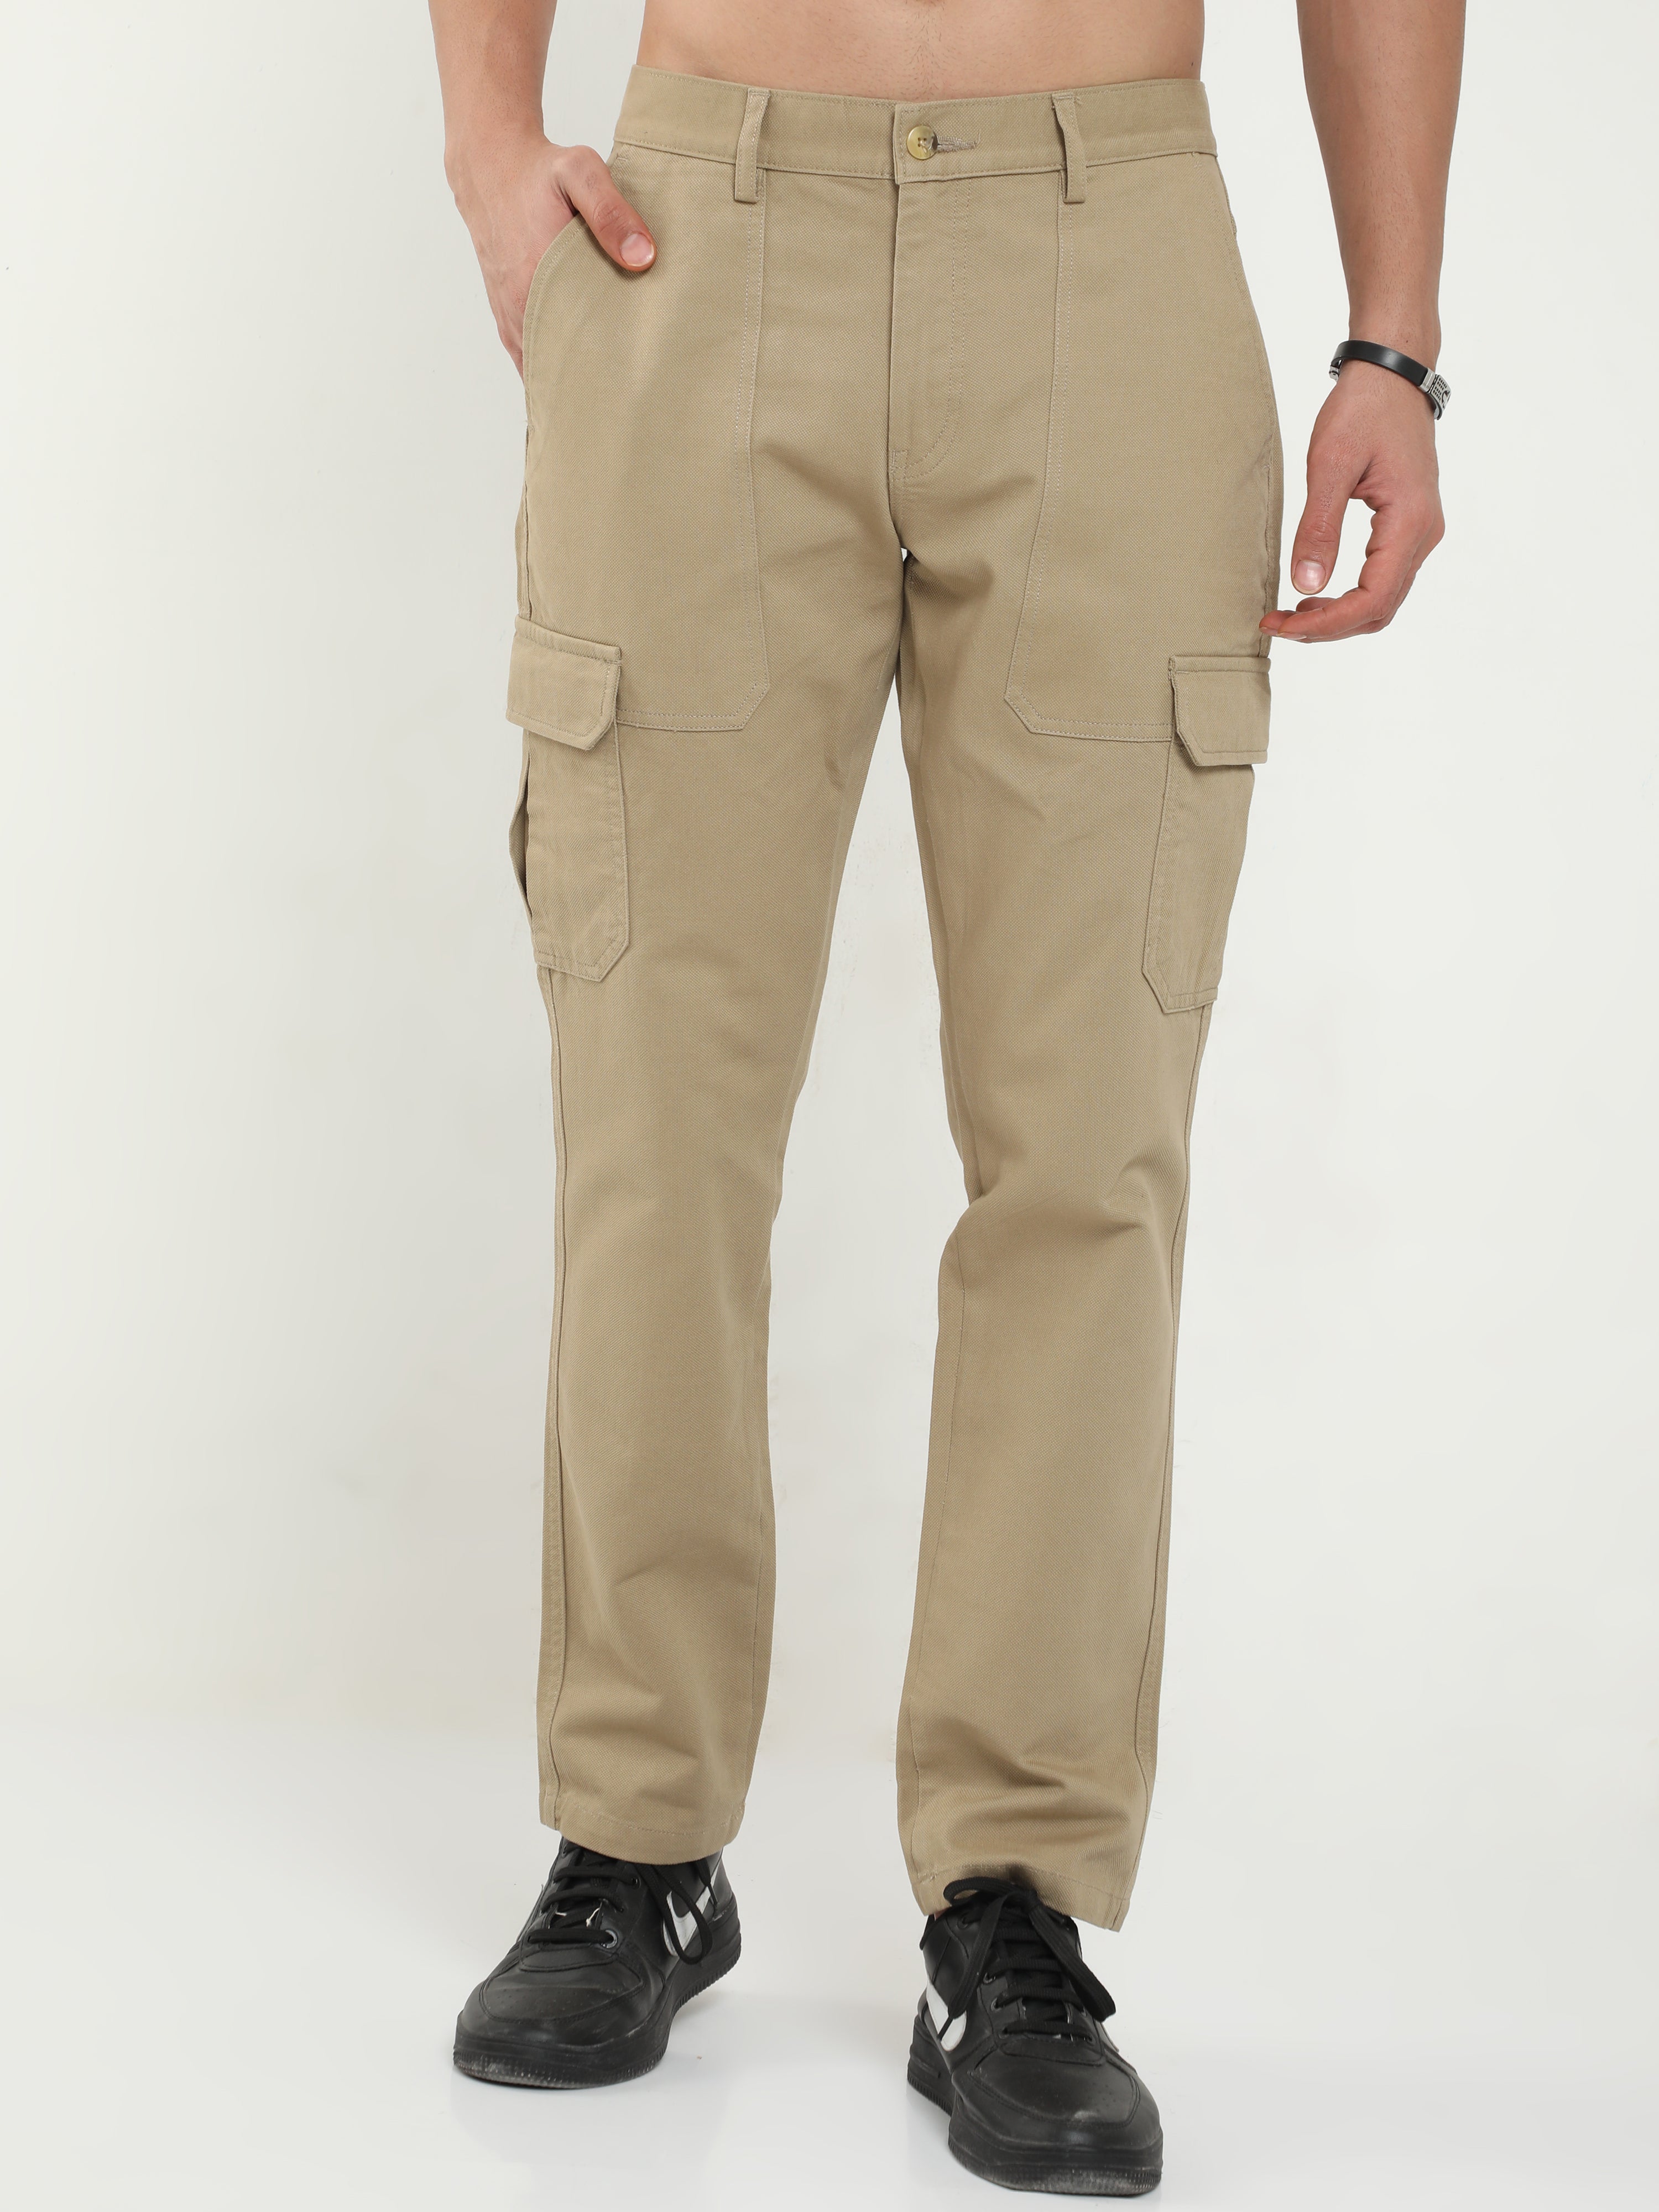 Mens Cotton Trousers - Mens Cotton Trousers Manufacturers Suppliers  Wholesalers in India